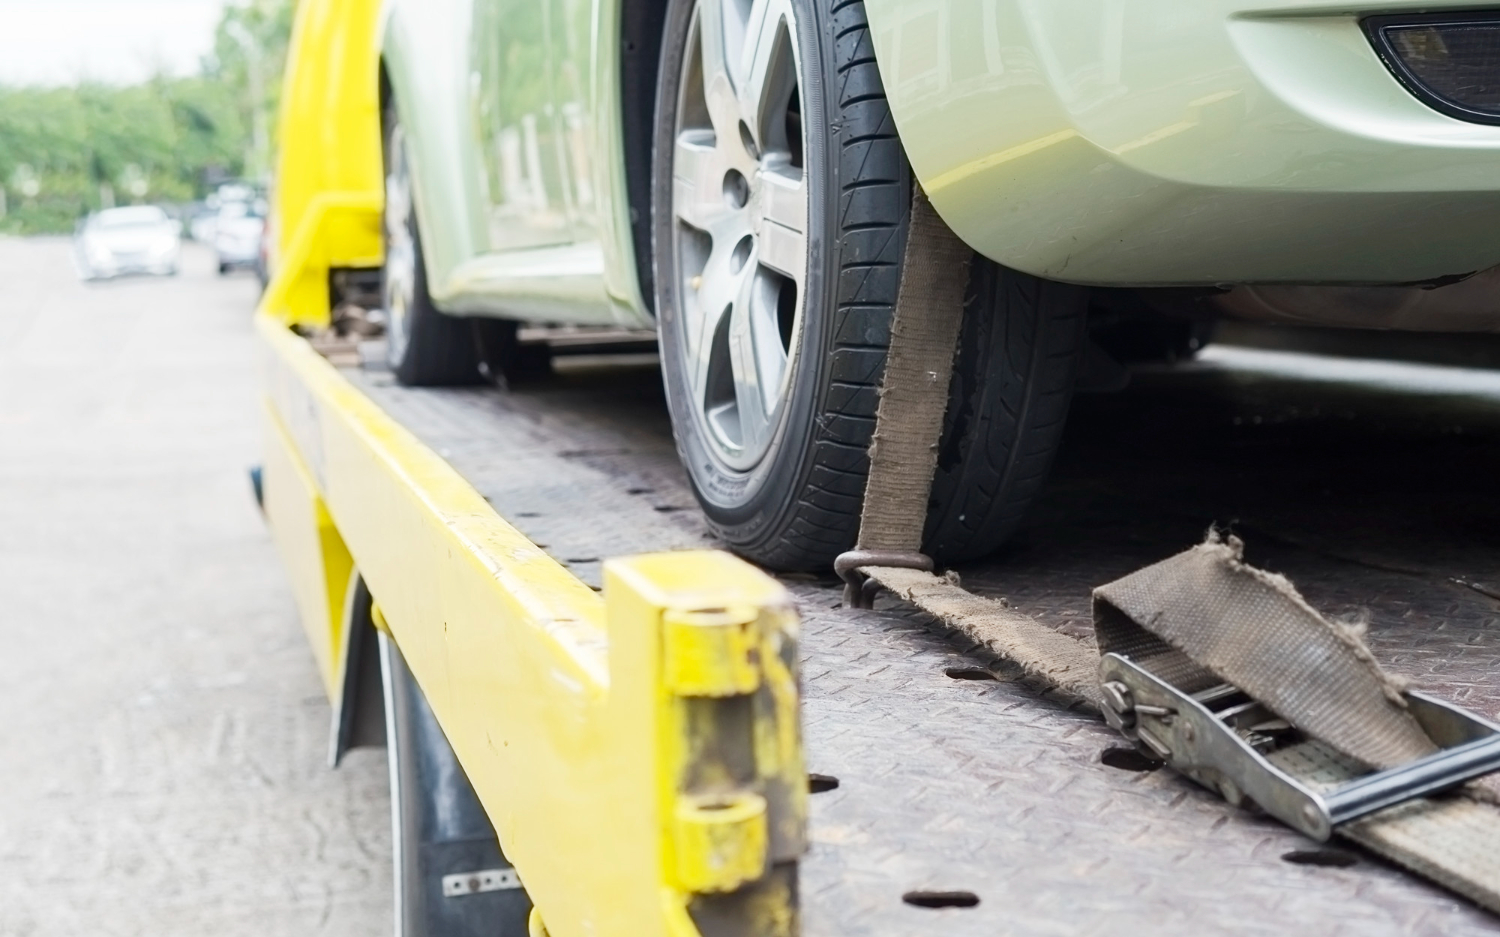 A clamped green car being towed on a truck.